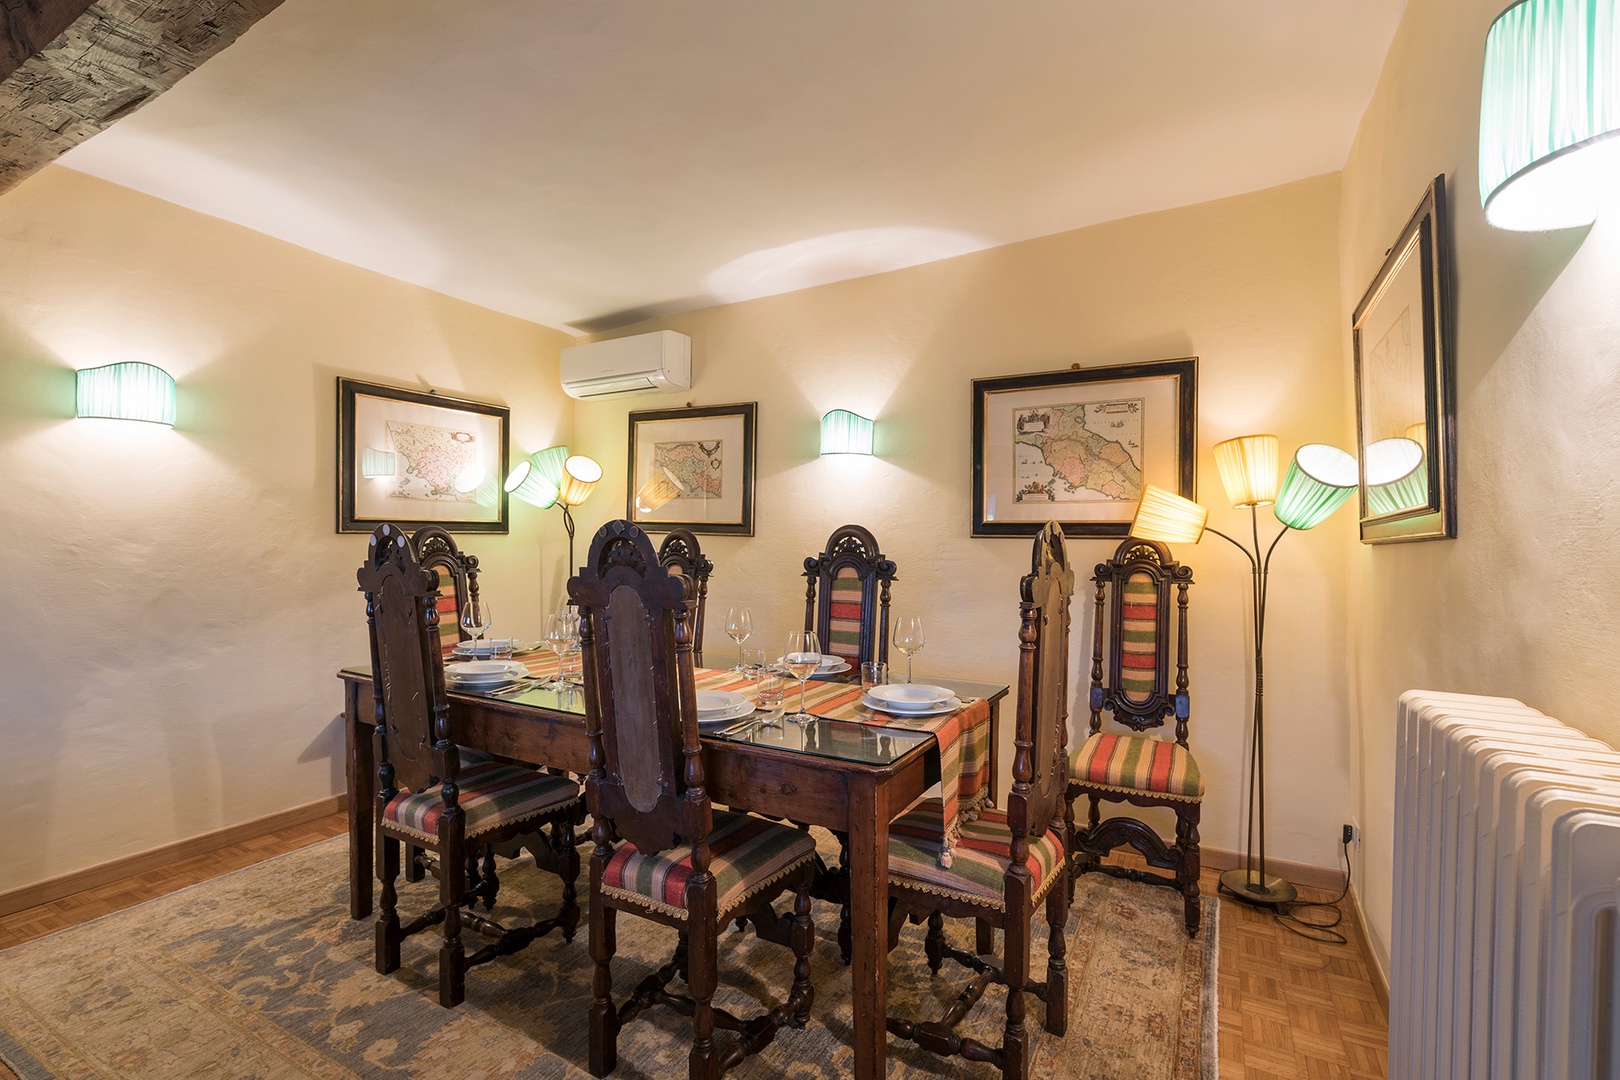 Experience how the nobility of Florence once lived in this fine, elegant apartment.